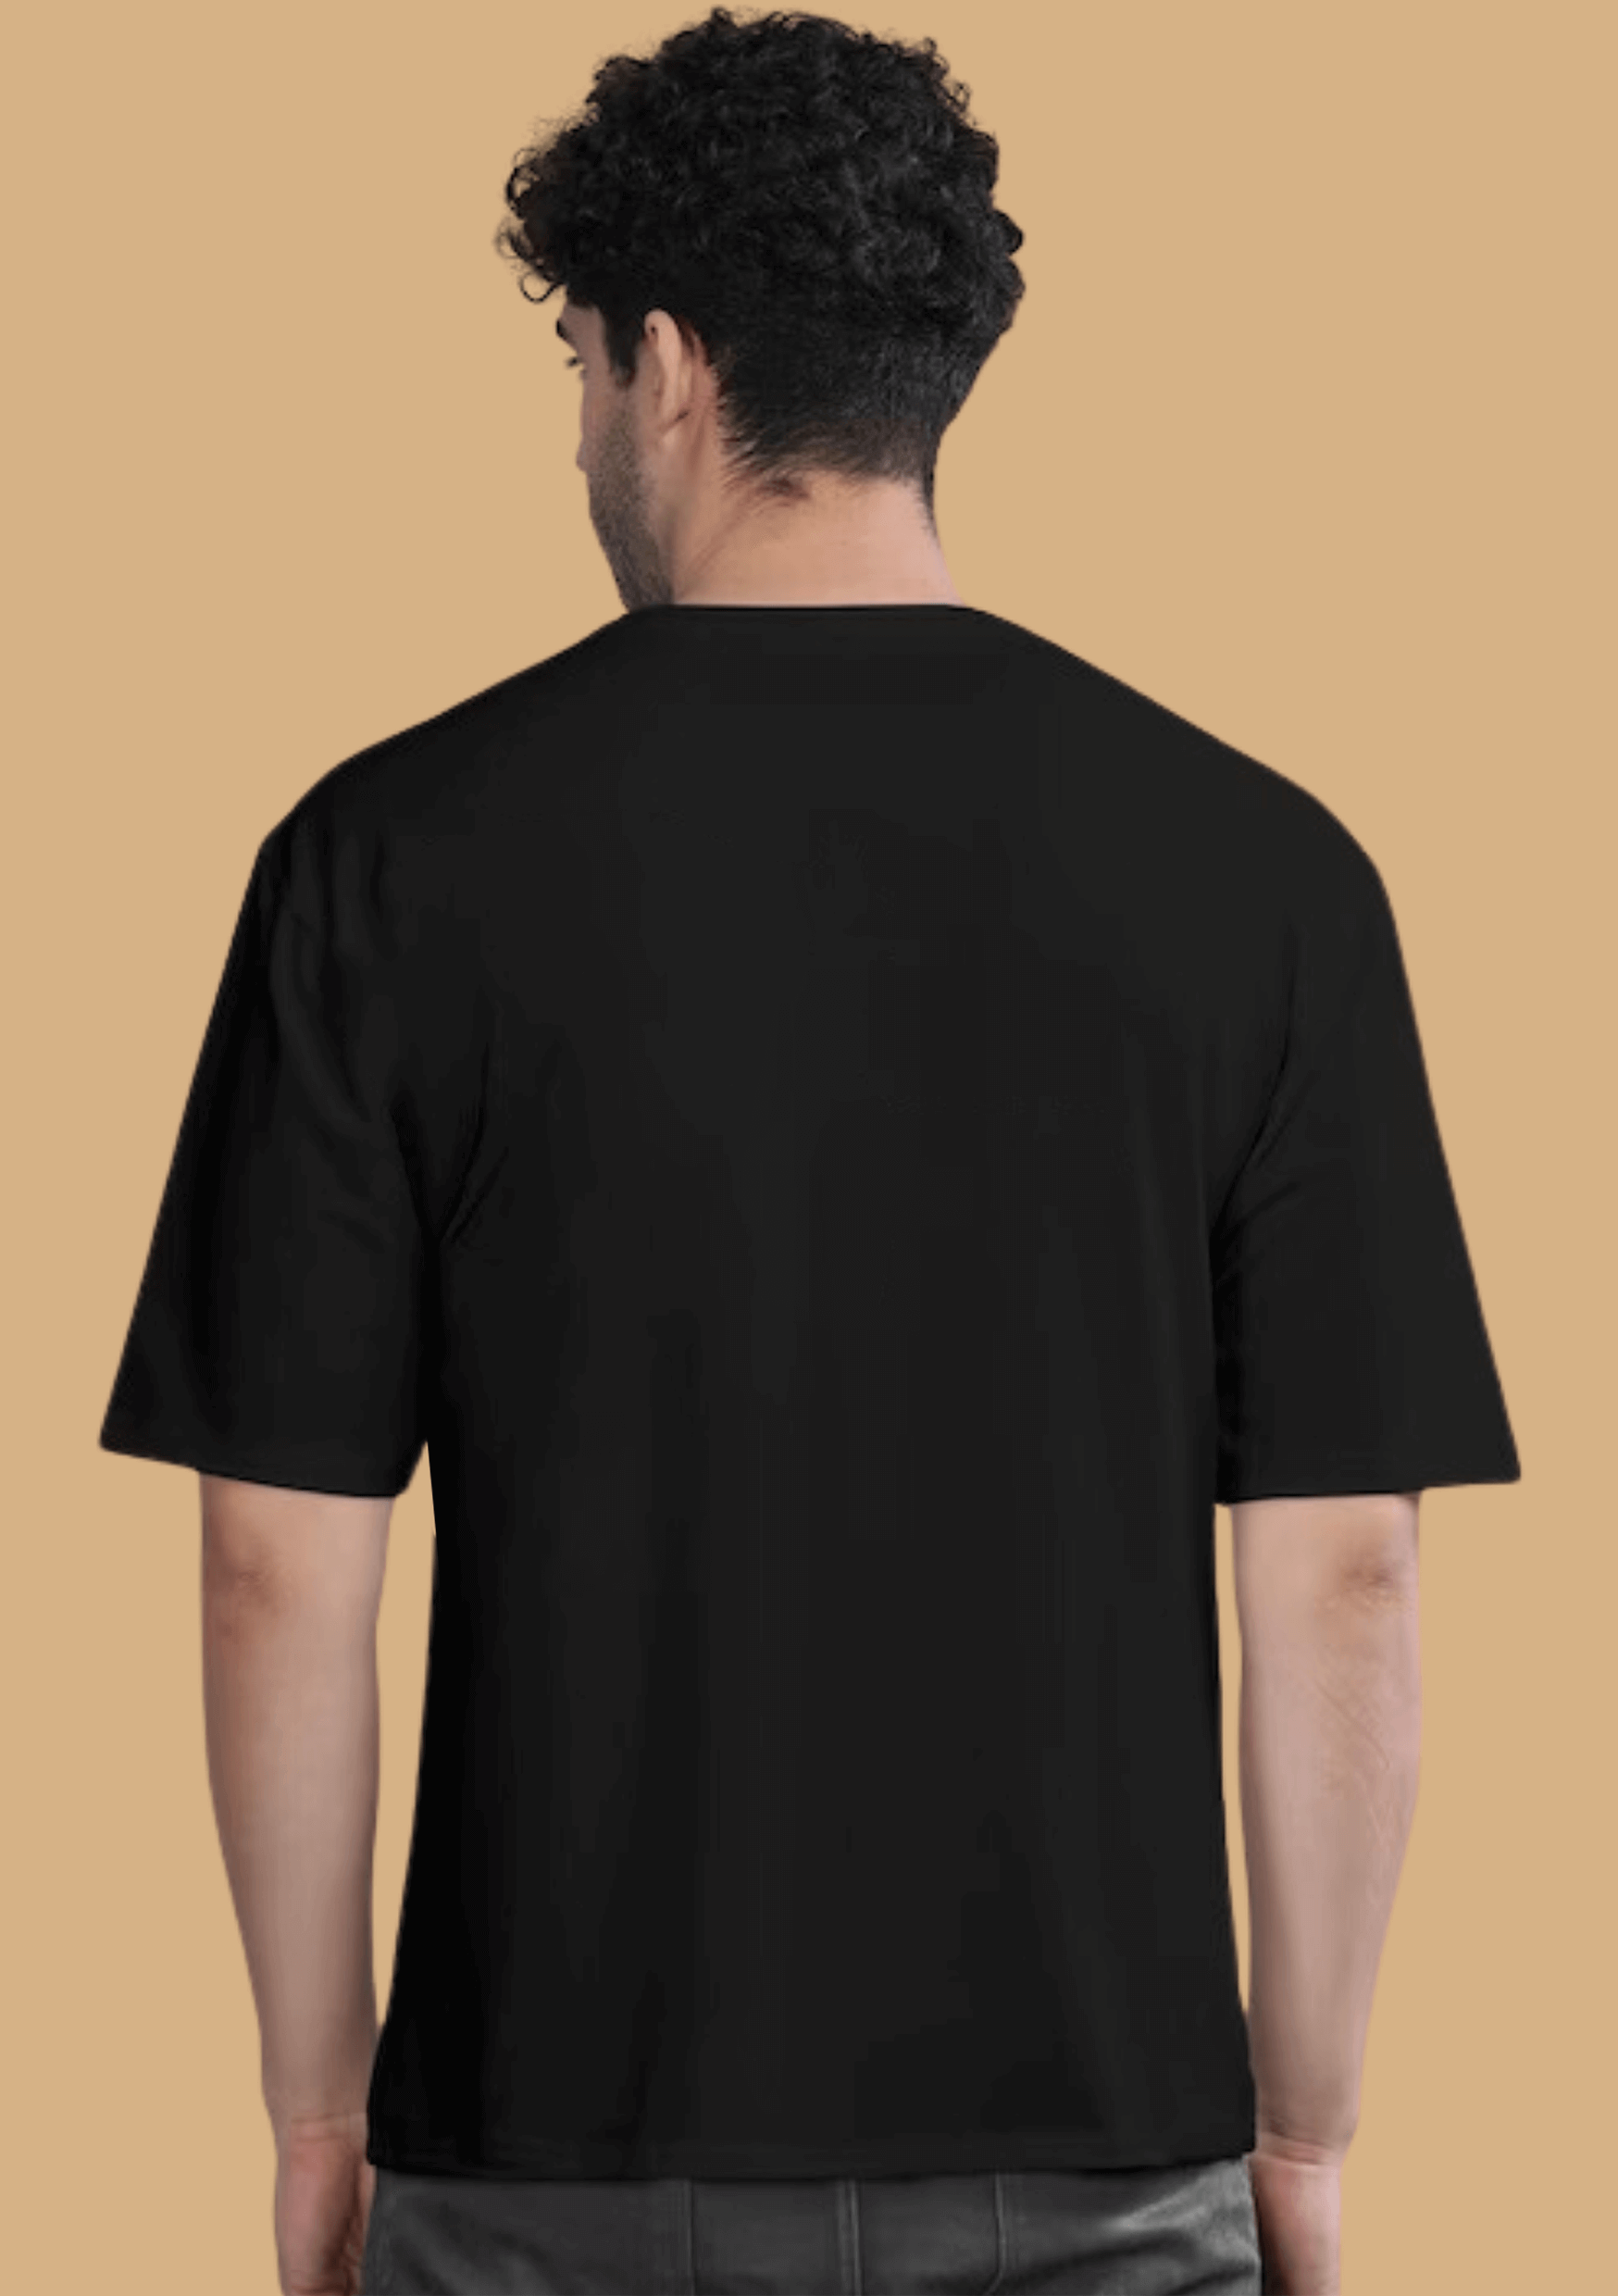 Army printed black color men's oversized t-shirt by offmint